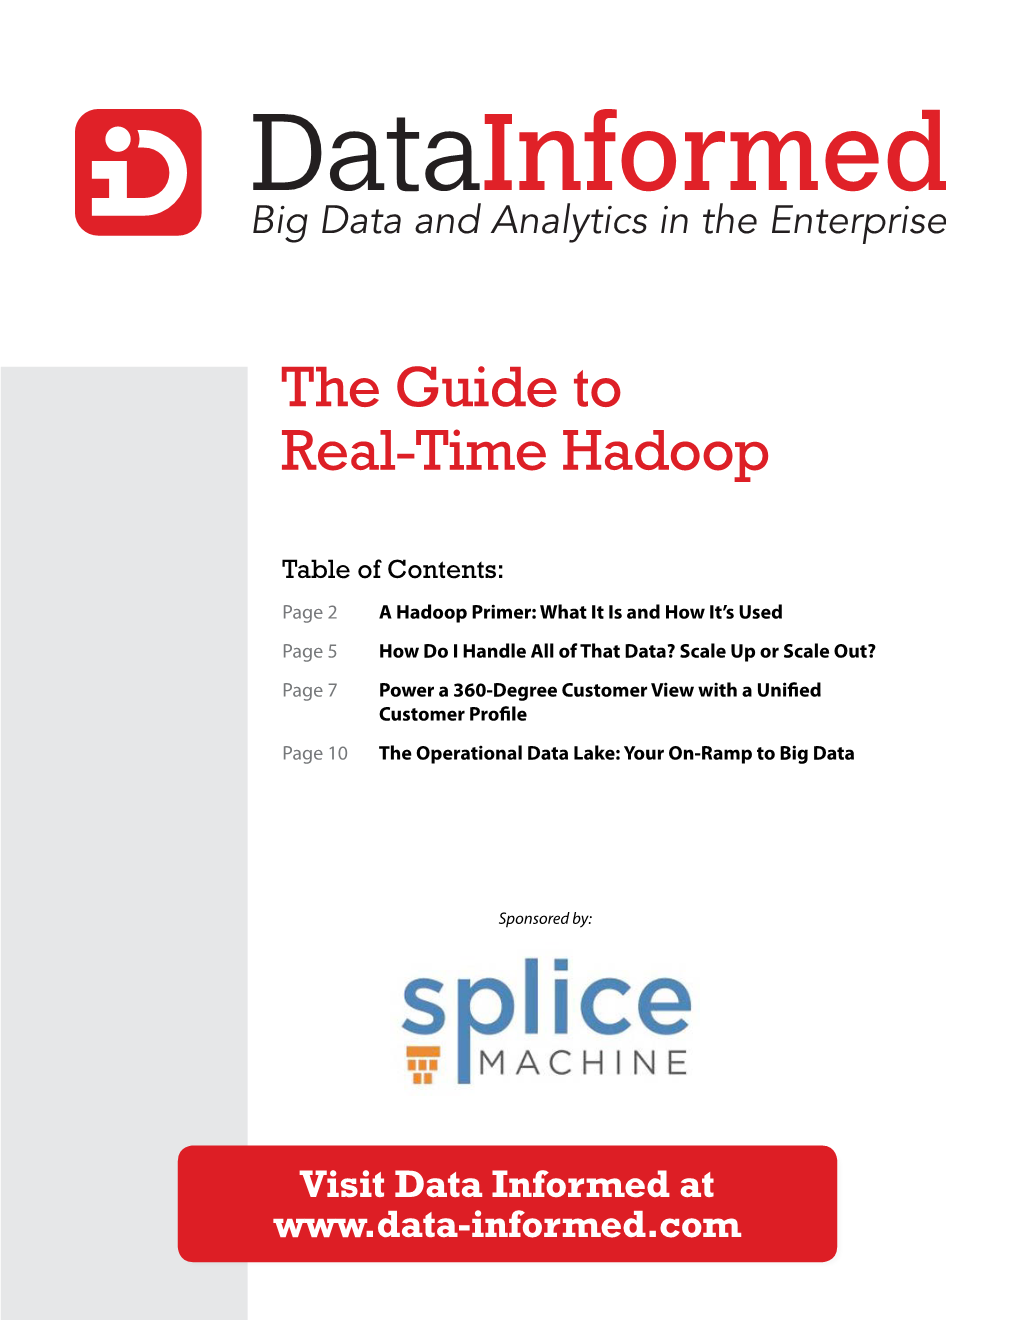 The Guide to Real-Time Hadoop